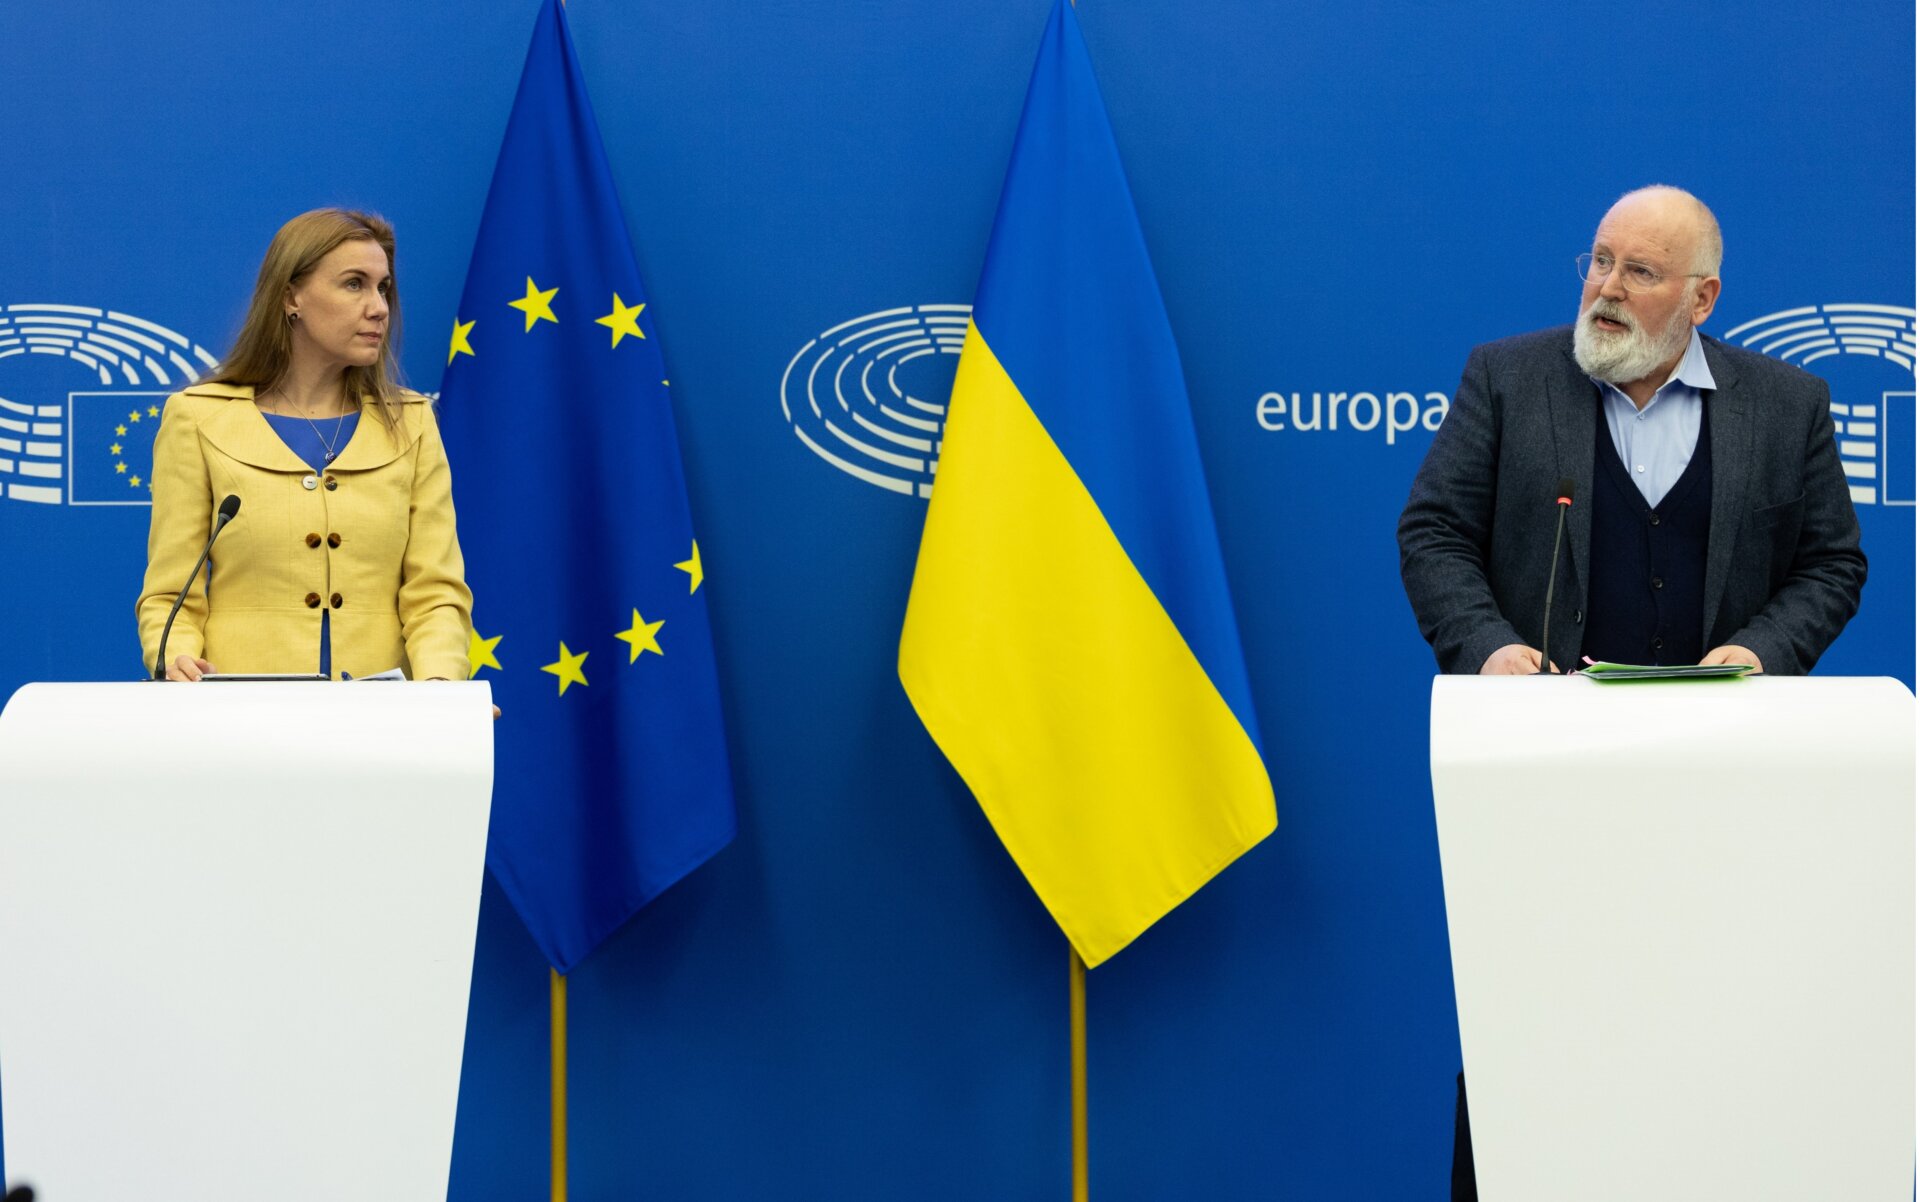 This is an image of the presentation of the RePowerEU Communication by Kadri Simson, European Commissioner for Energy, and Frans Timmermans, Executive Vice-President of the European Commission in charge of the European Green Deal, with flags of the European Union and Ukraine in the background.